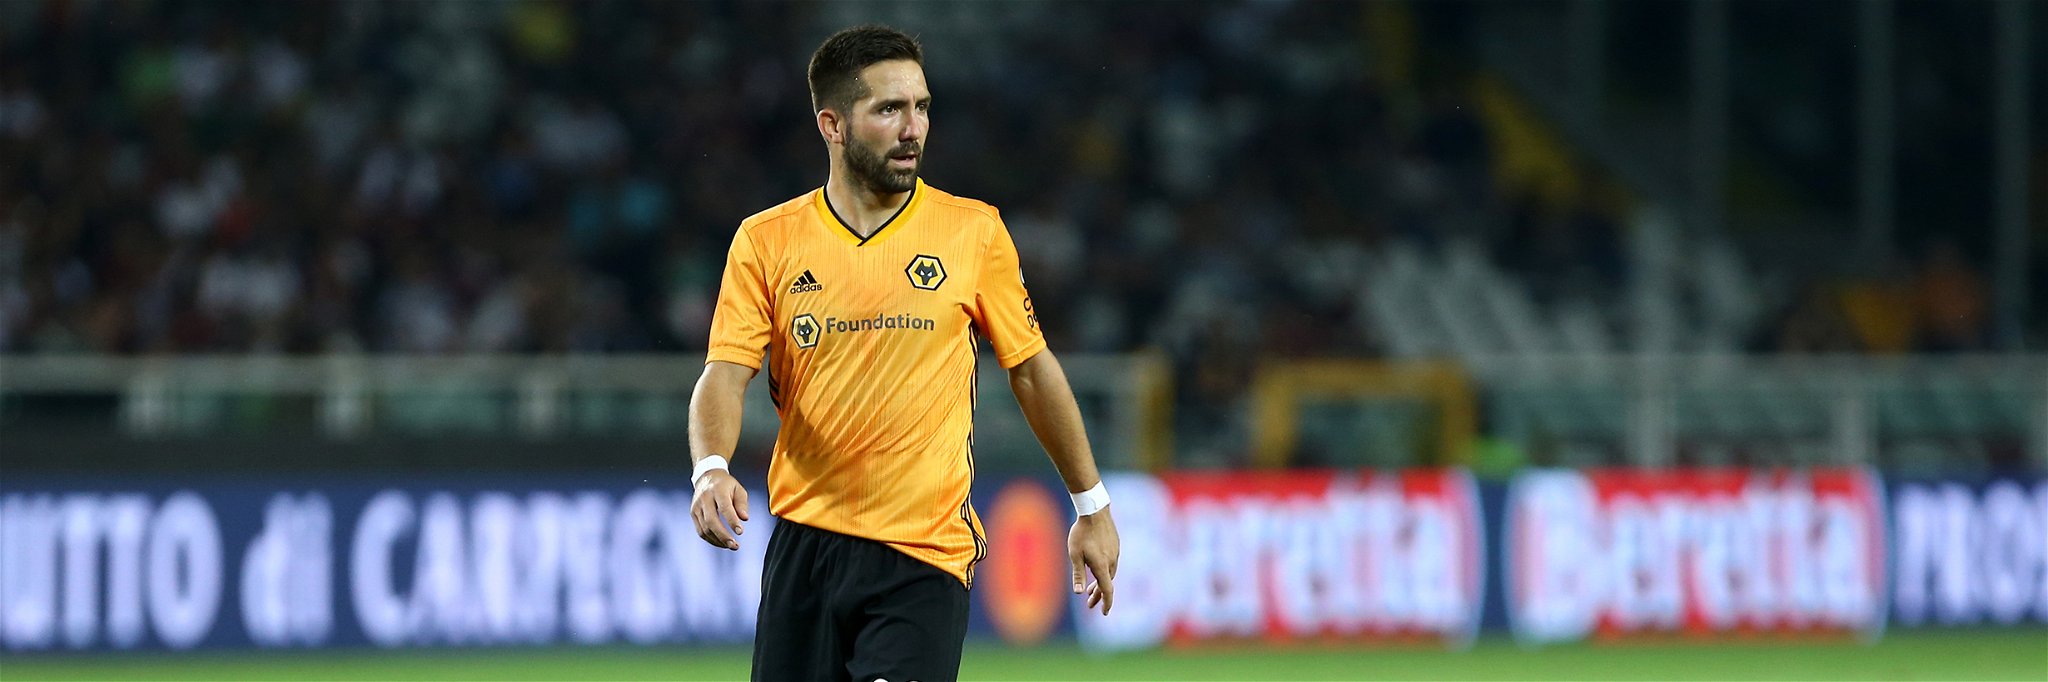 Wolves midfileder Joao Moutinho has inspired a limited edition of wines.